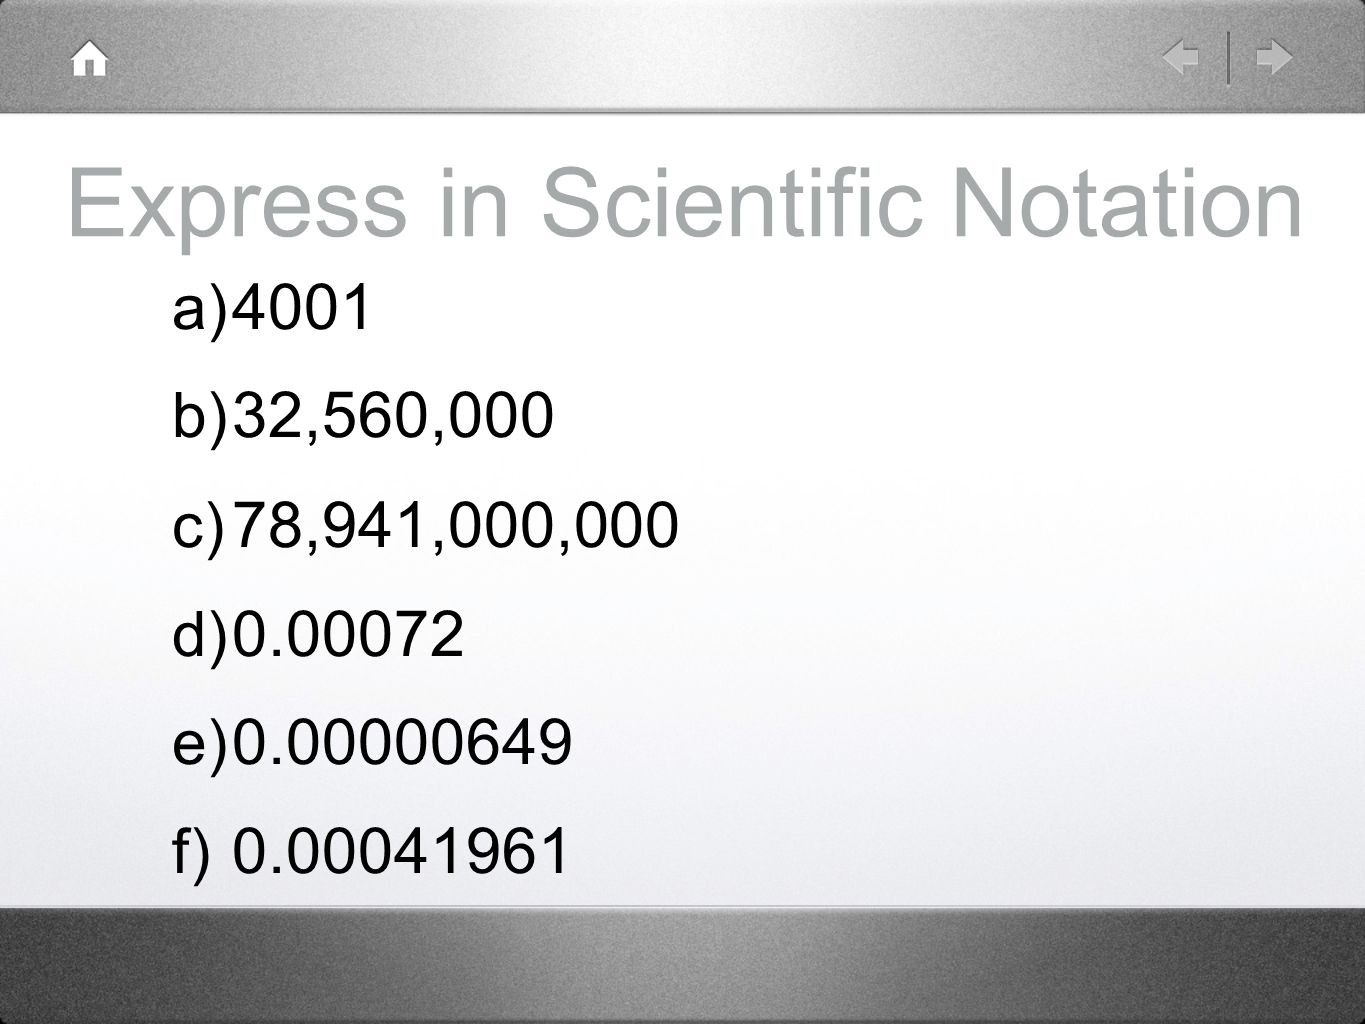 Express in Scientific Notation